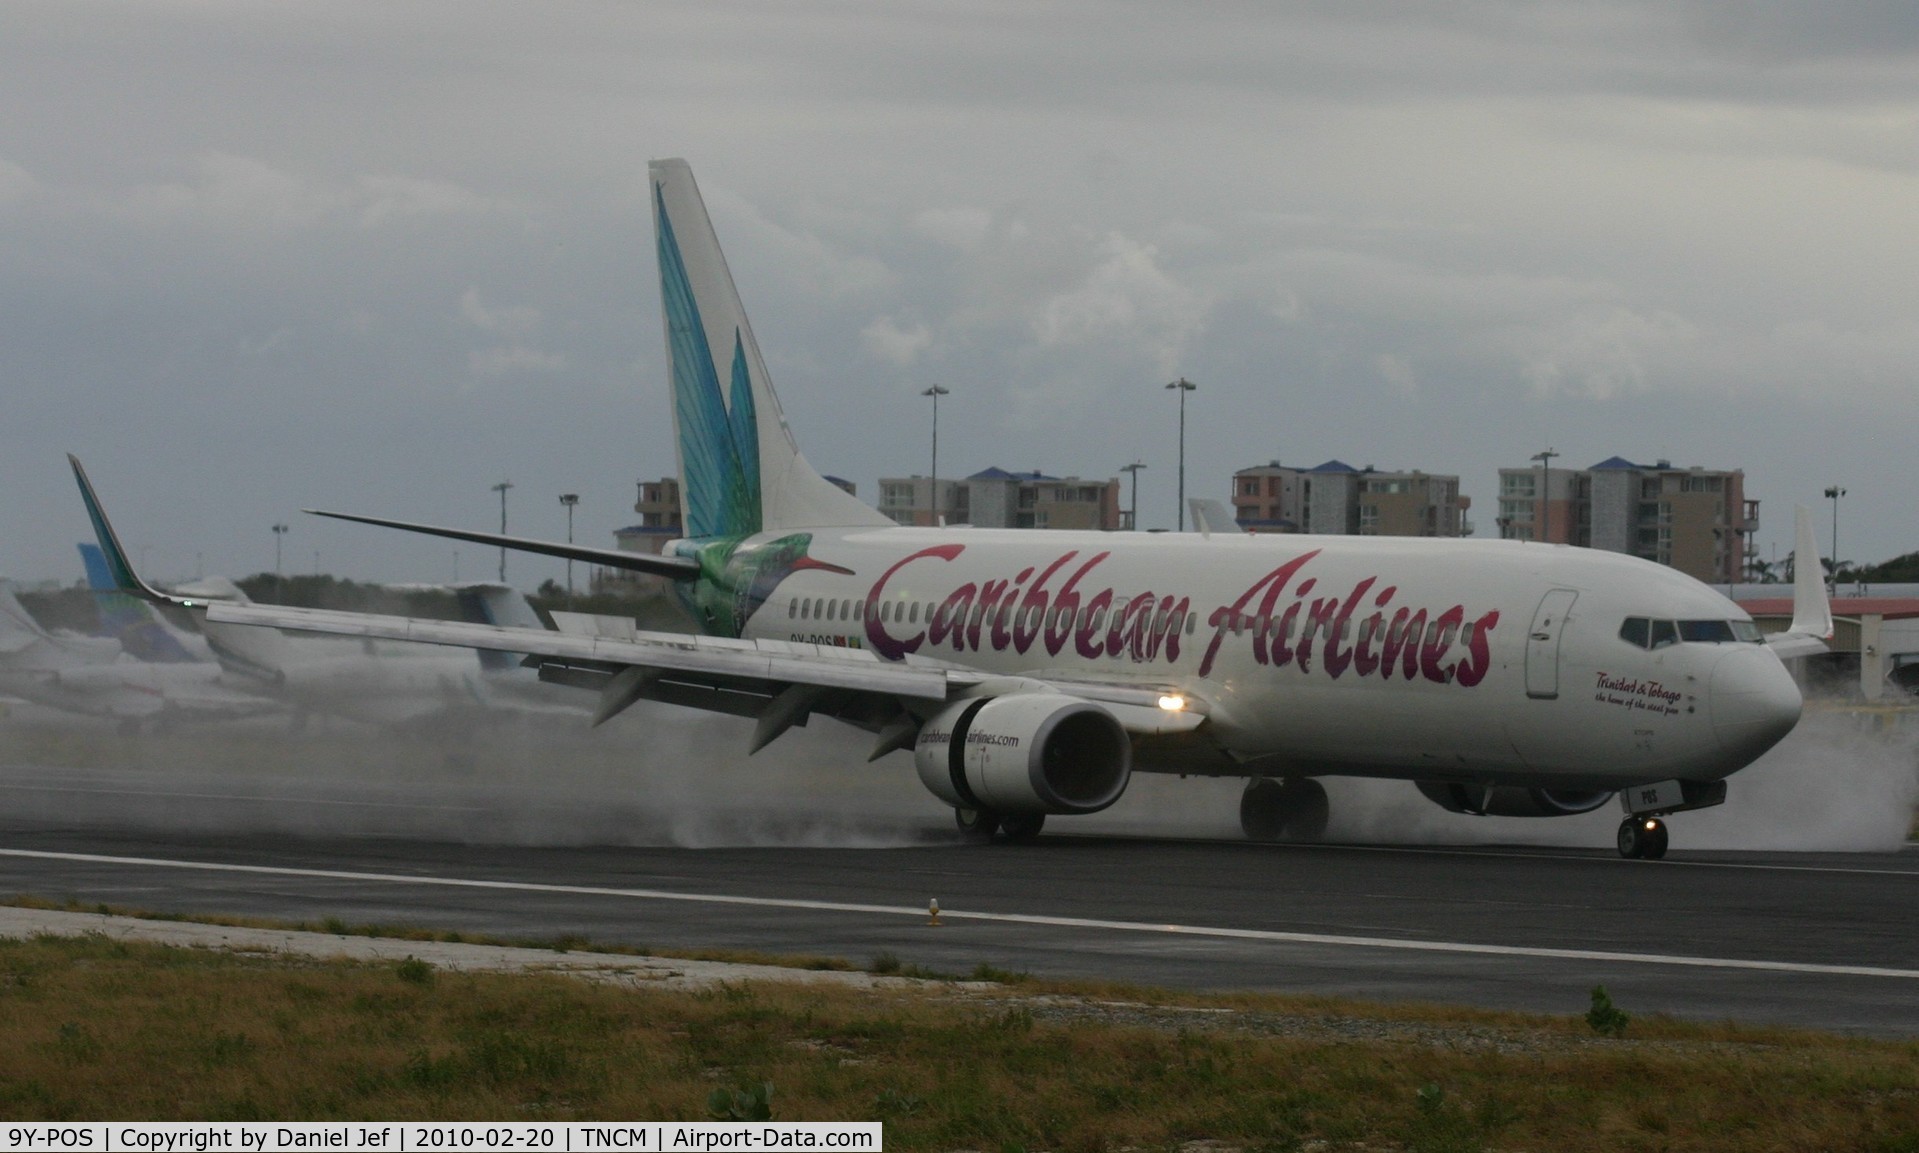 9Y-POS, 2000 Boeing 737-8Q8 C/N 28230, Caribbean airlines landing on a wet day at TNCM